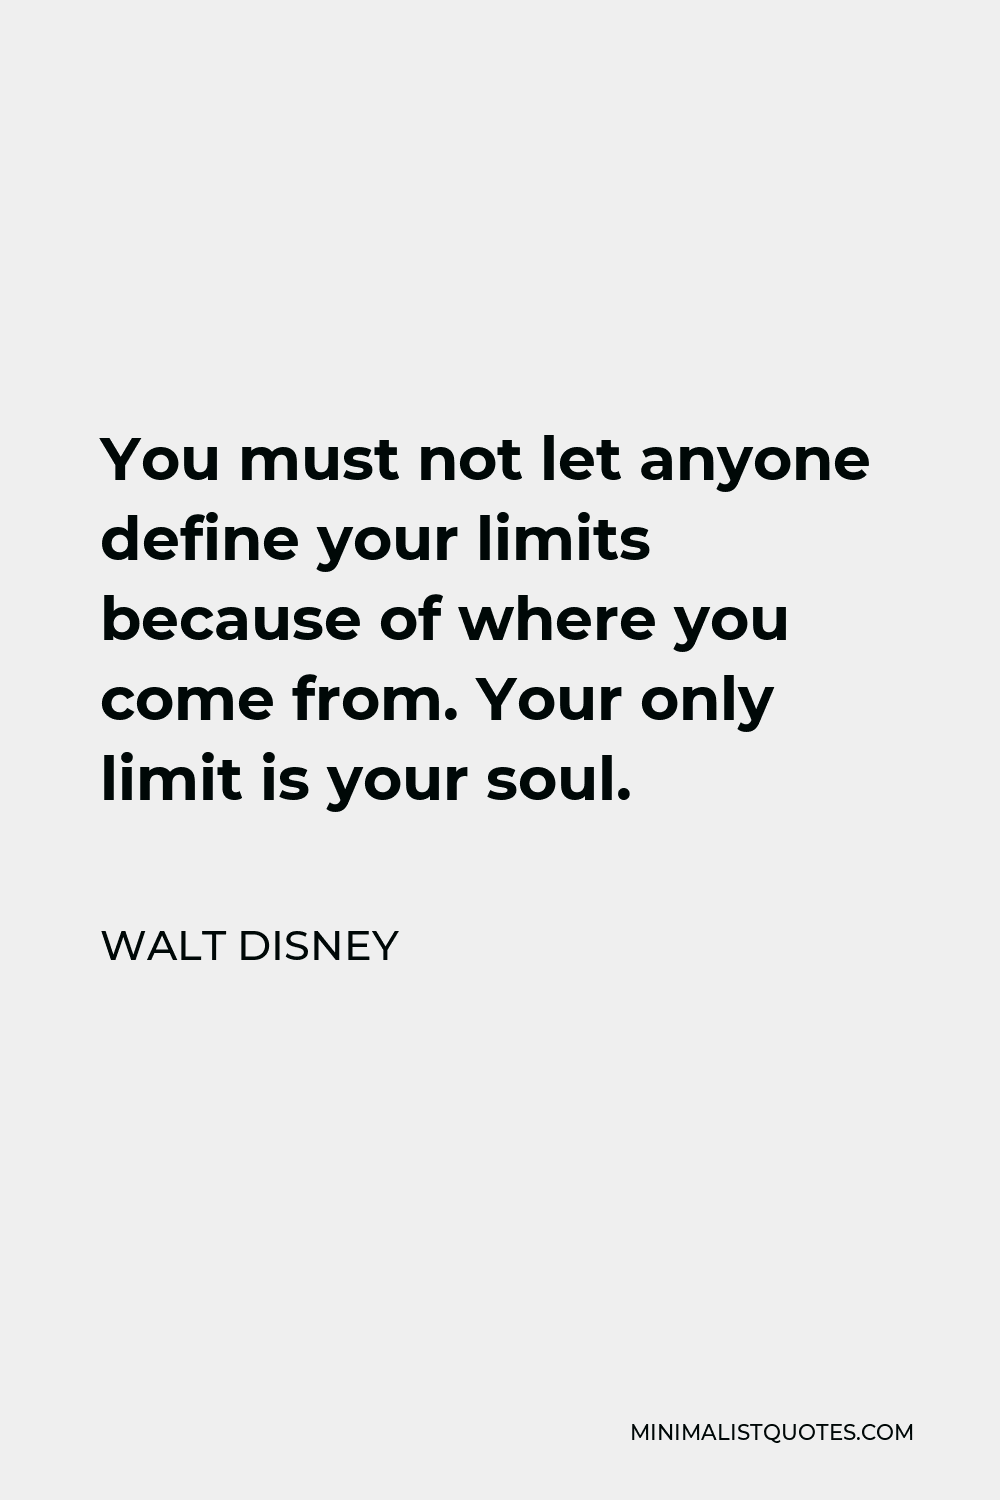 Walt Disney Quote - You must not let anyone define your limits because of where you come from. Your only limit is your soul.